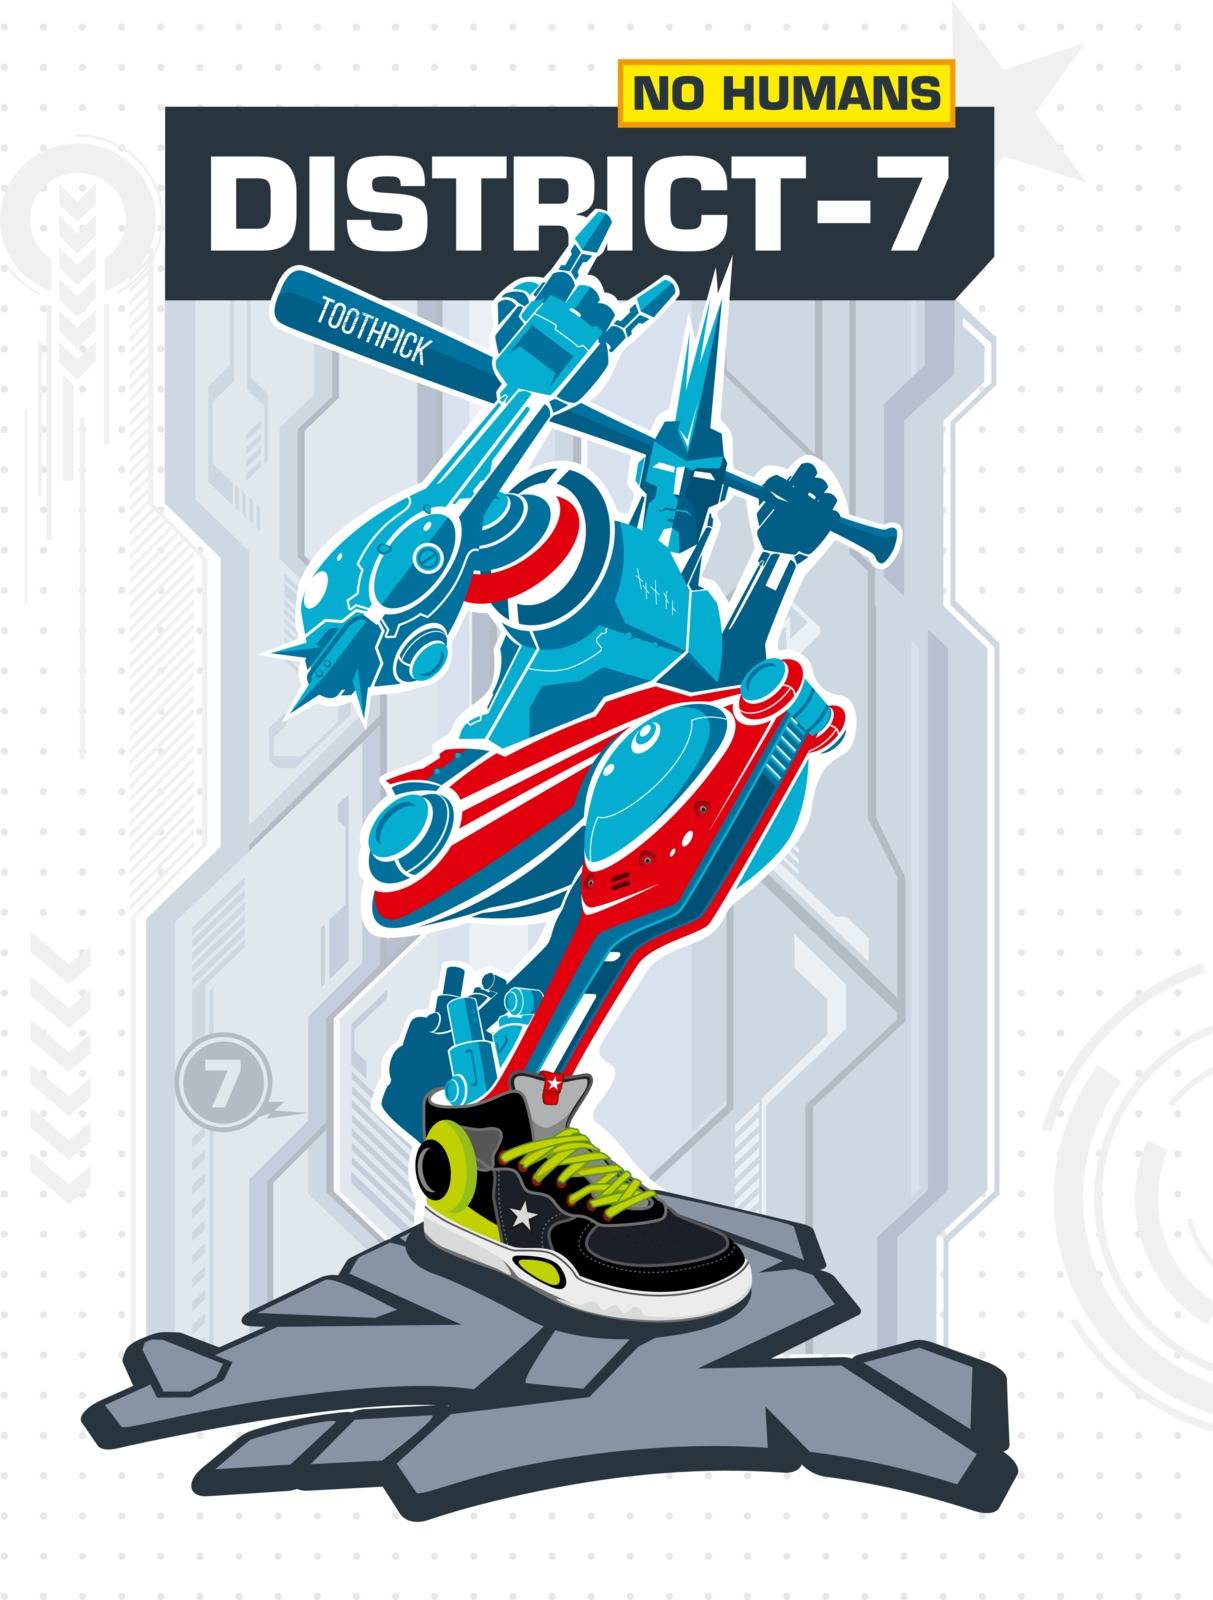 Armed Robot From District 7 vector illustration